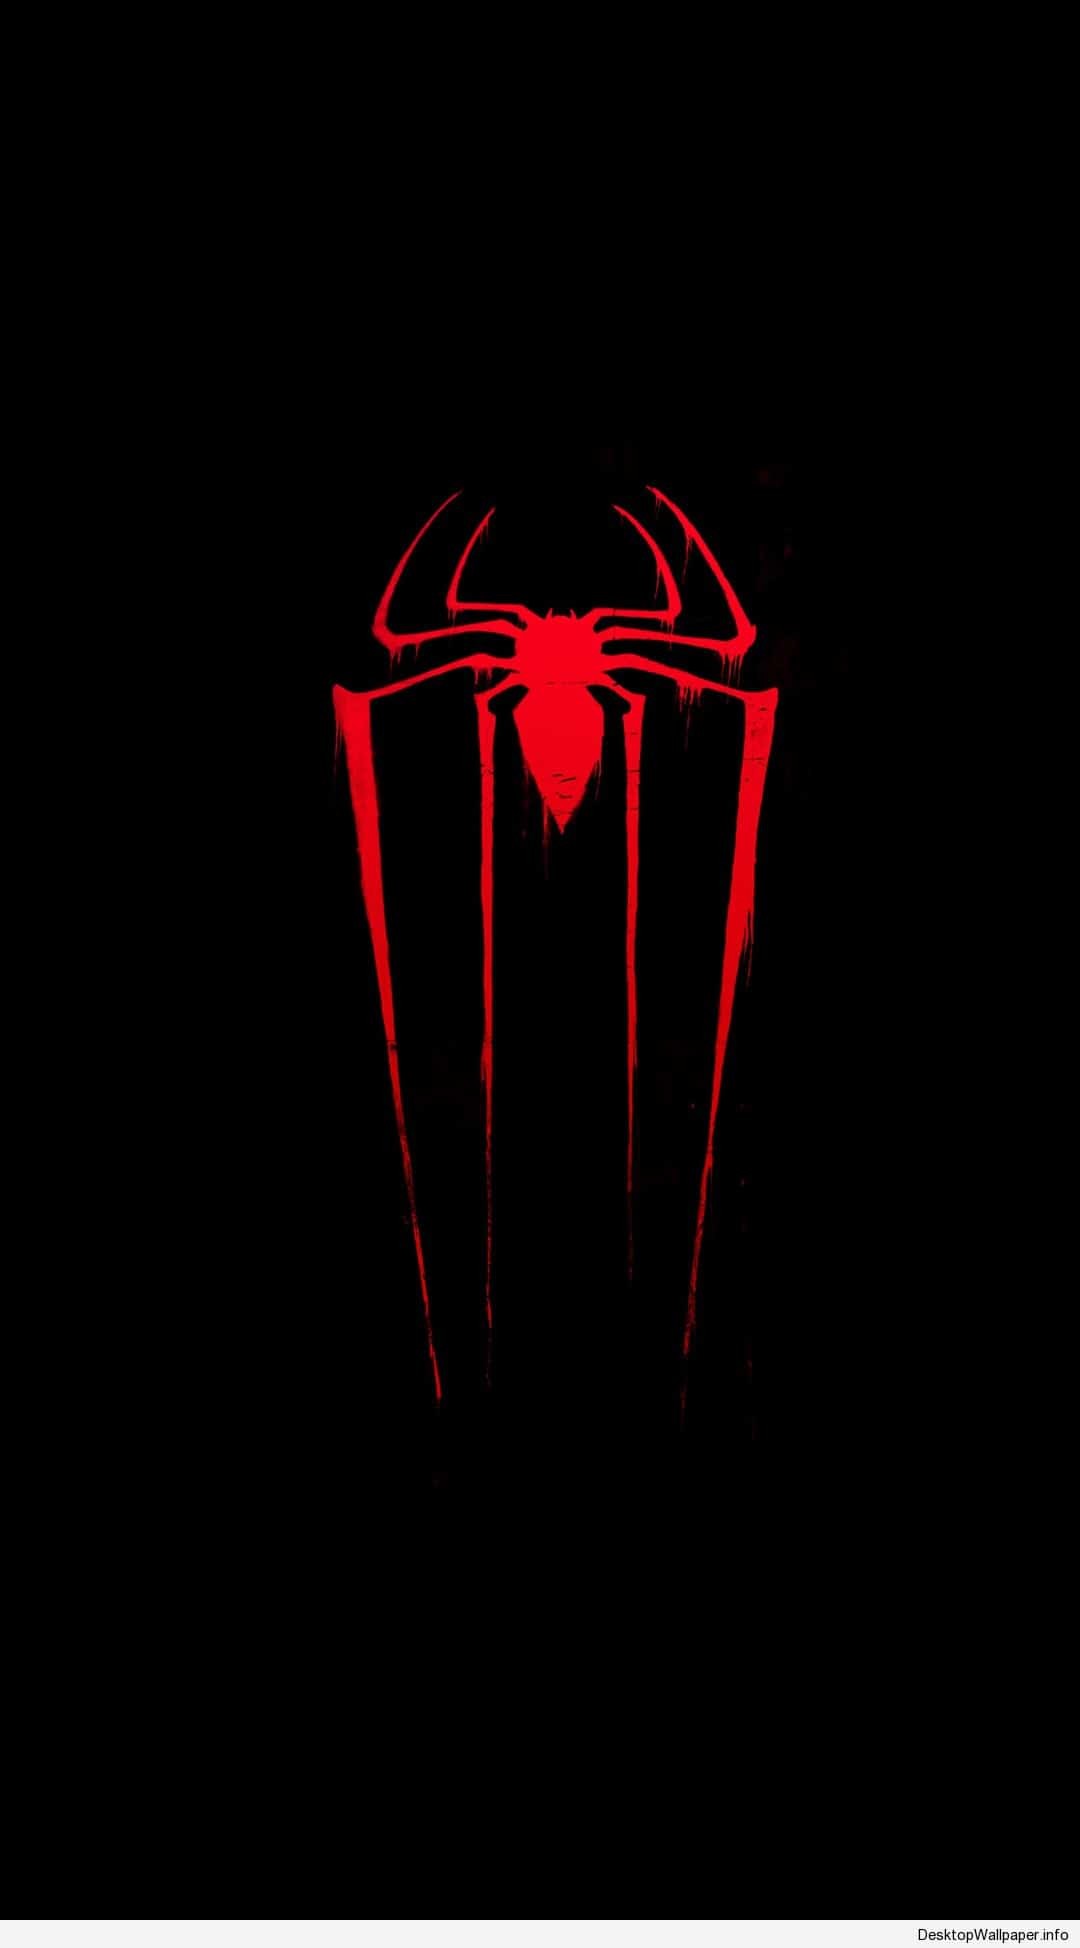 1080x1948 spiderman logo wallpaper for android